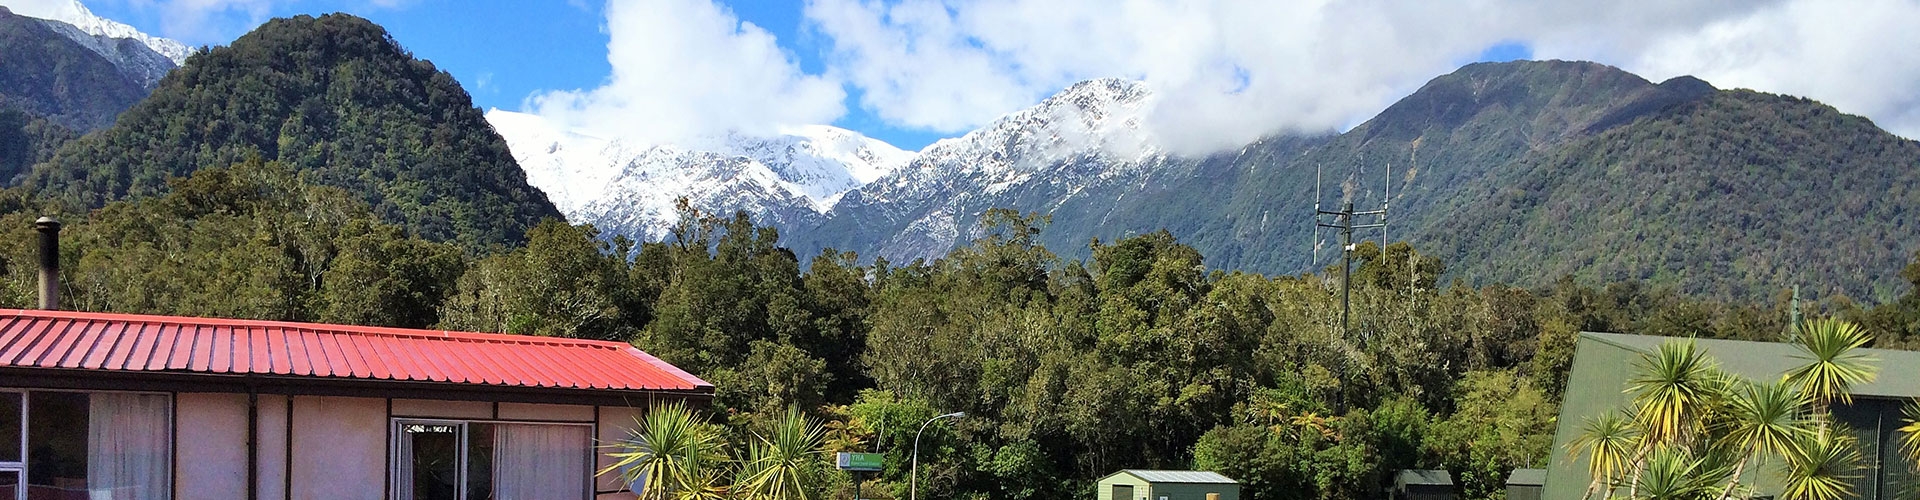 Chateau Backpackers & Motels in Franz Josef